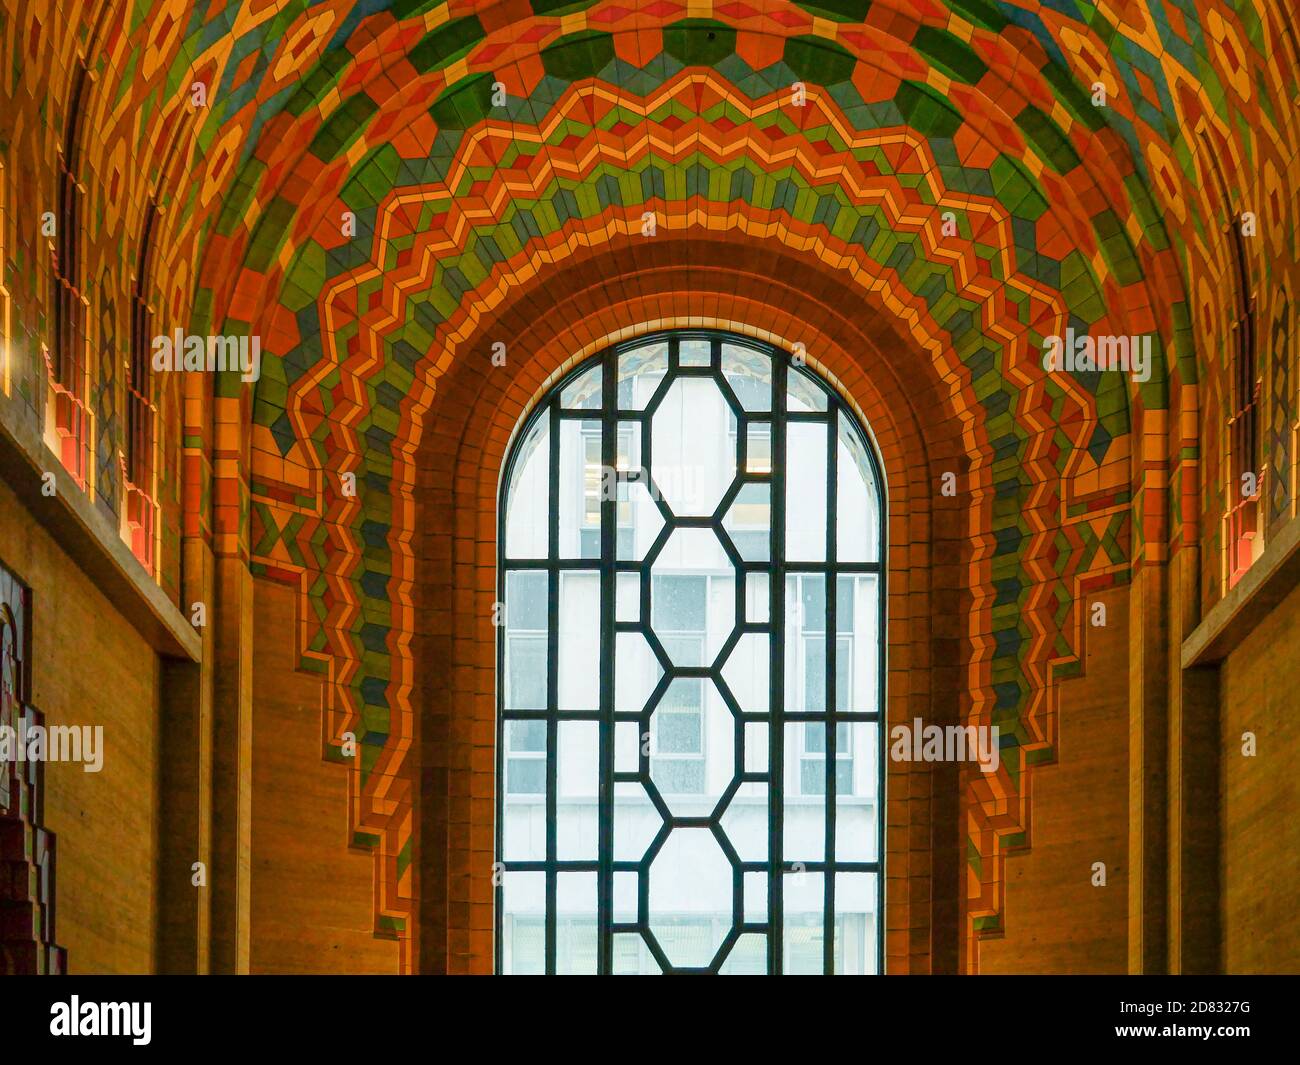 Barrel vaulted ceiling and ached window in the Interior of the art-deco Guardian Building in Detroit, Michigan Stock Photo